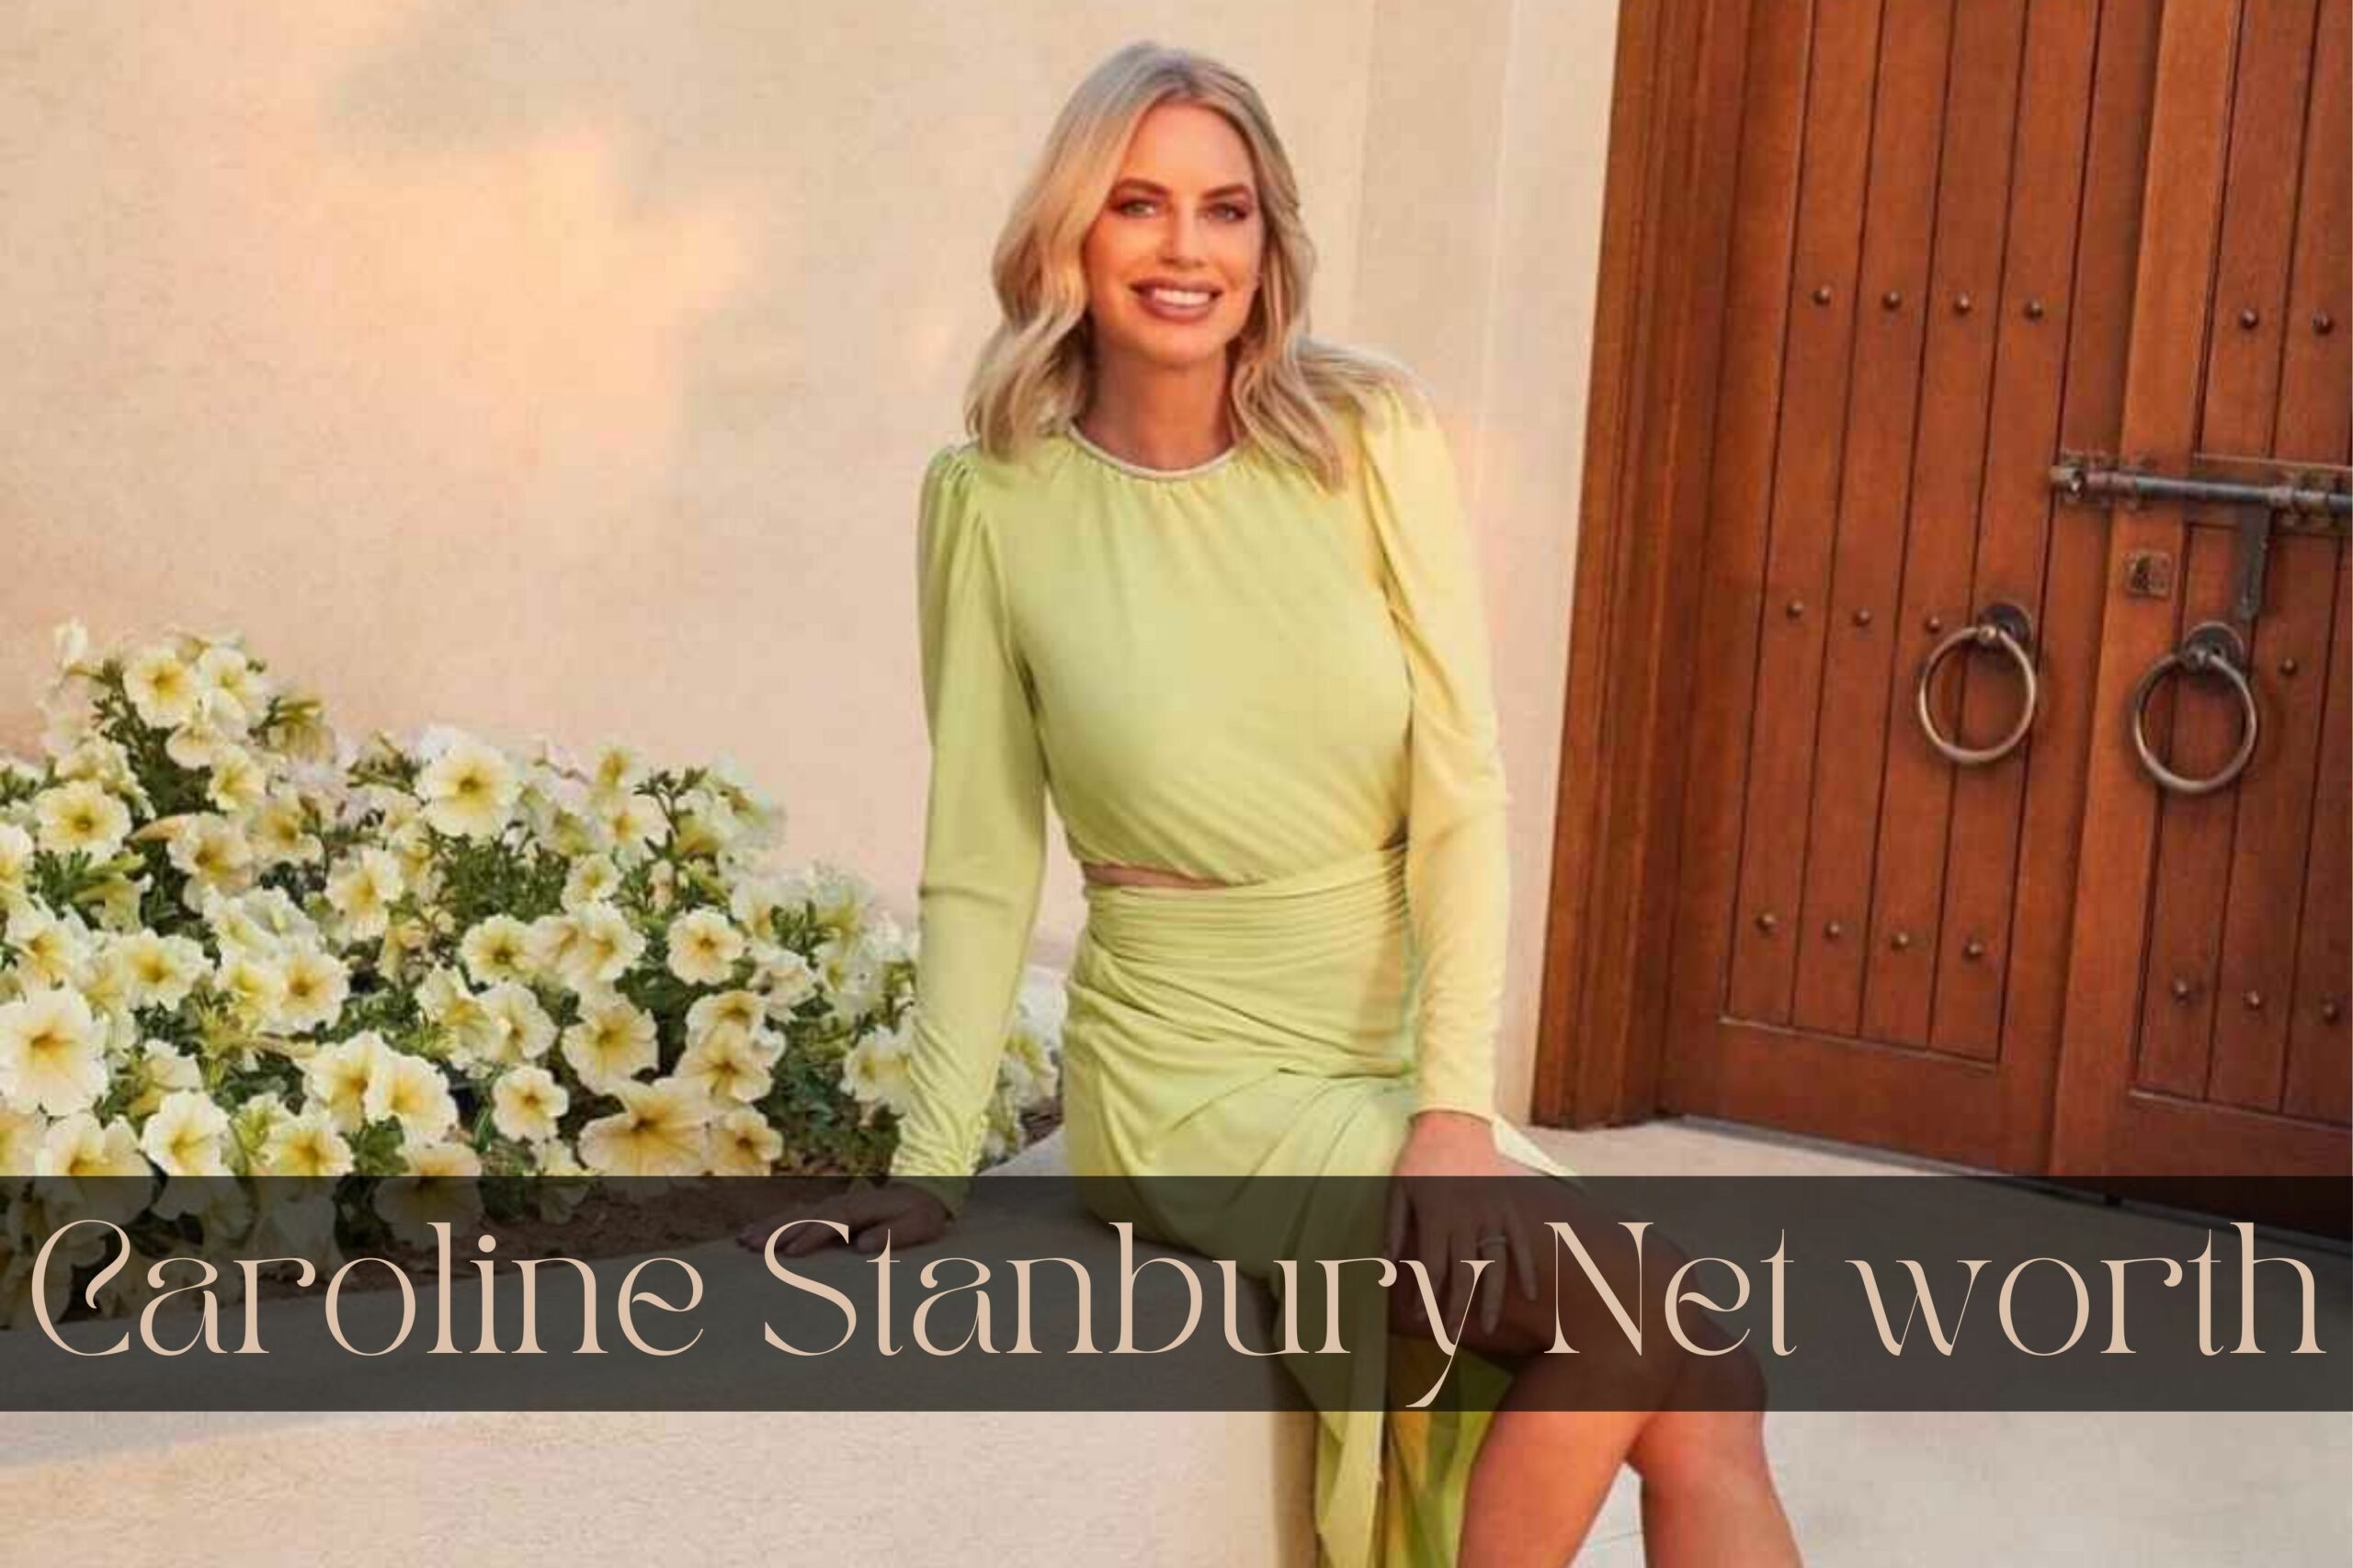 Caroline Stanbury Net worth, Career And Personal Life Details 2022!